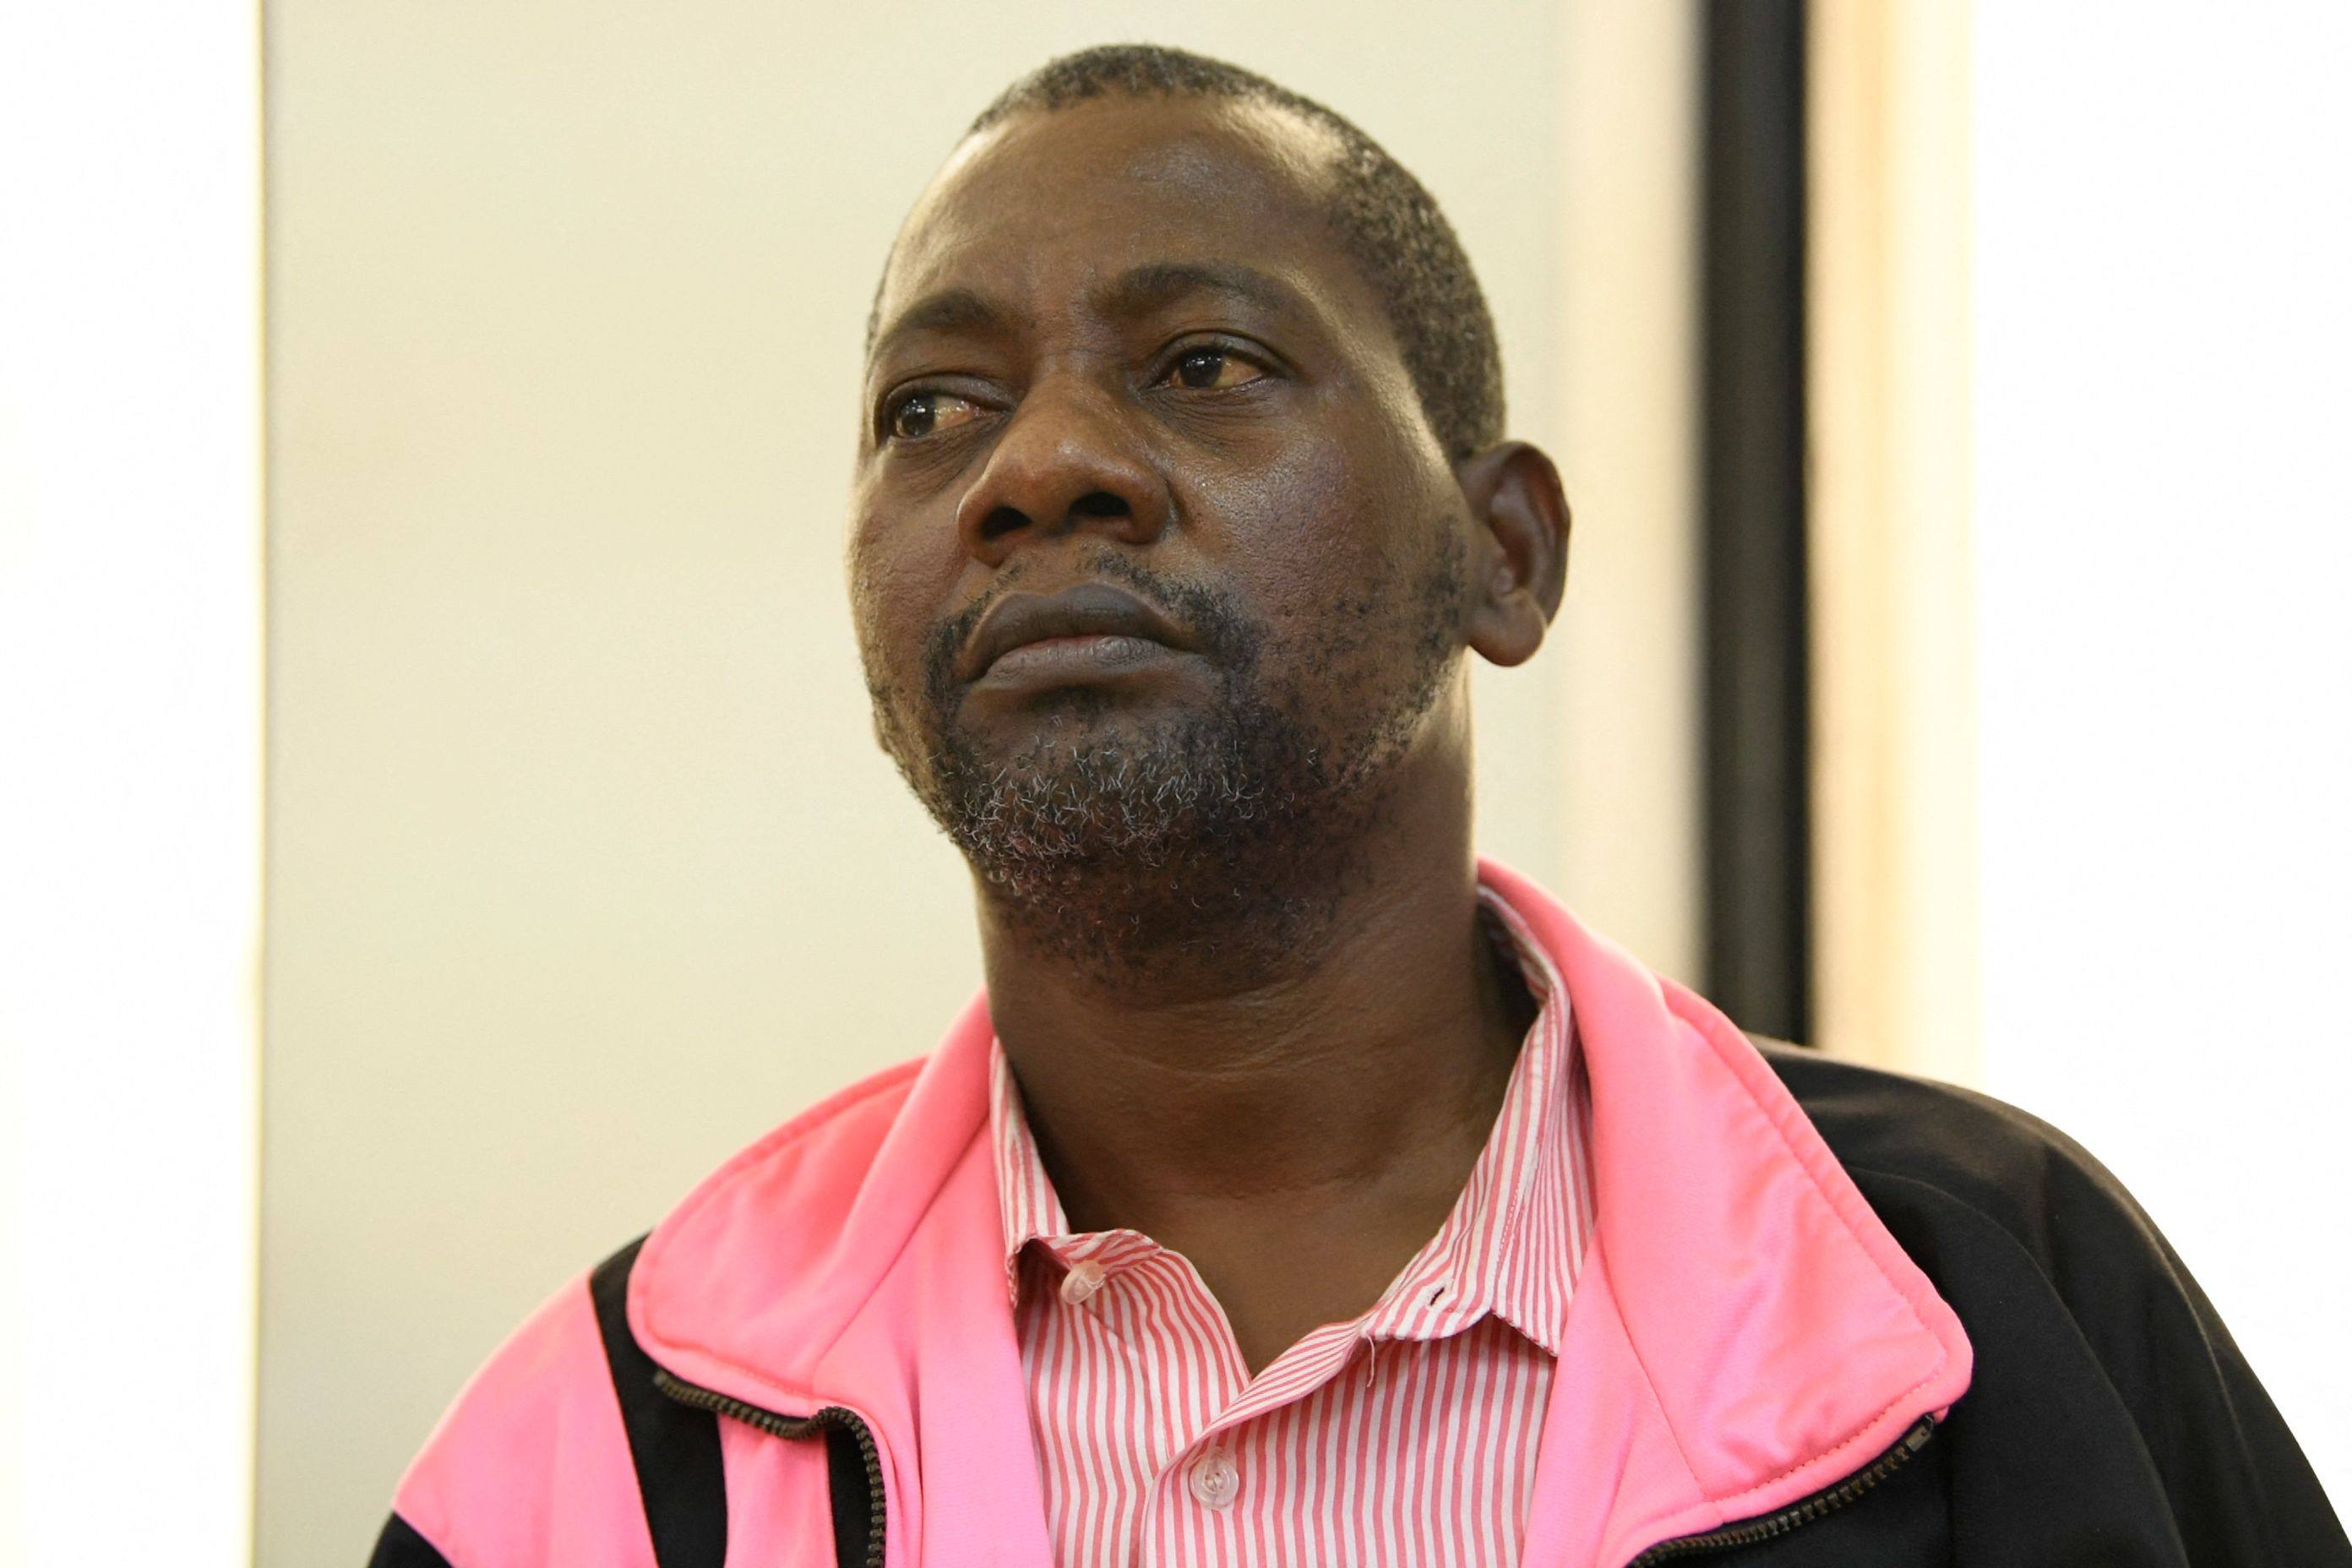 A Kenyan pastor will face terrorism charges, prosecutors said in connection with the deaths of over 100 people found buried in what has been dubbed the “Shakahola forest massacre”. Photo: AFP